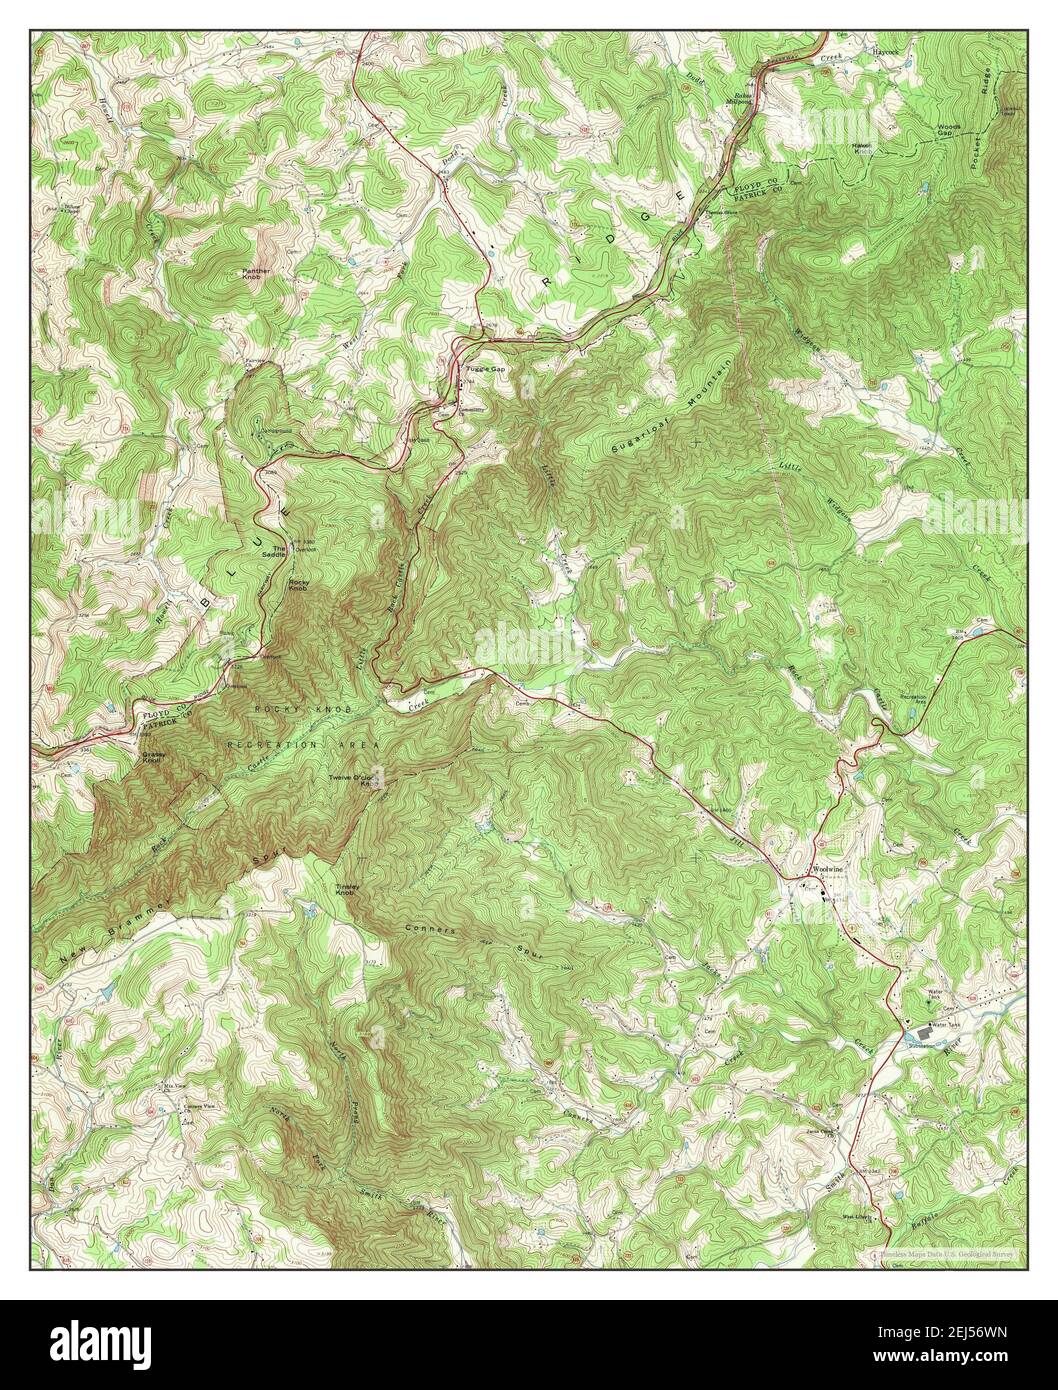 Woolwine, Virginia, map 1968, 1:24000, United States of America by Timeless Maps, data U.S. Geological Survey Stock Photo